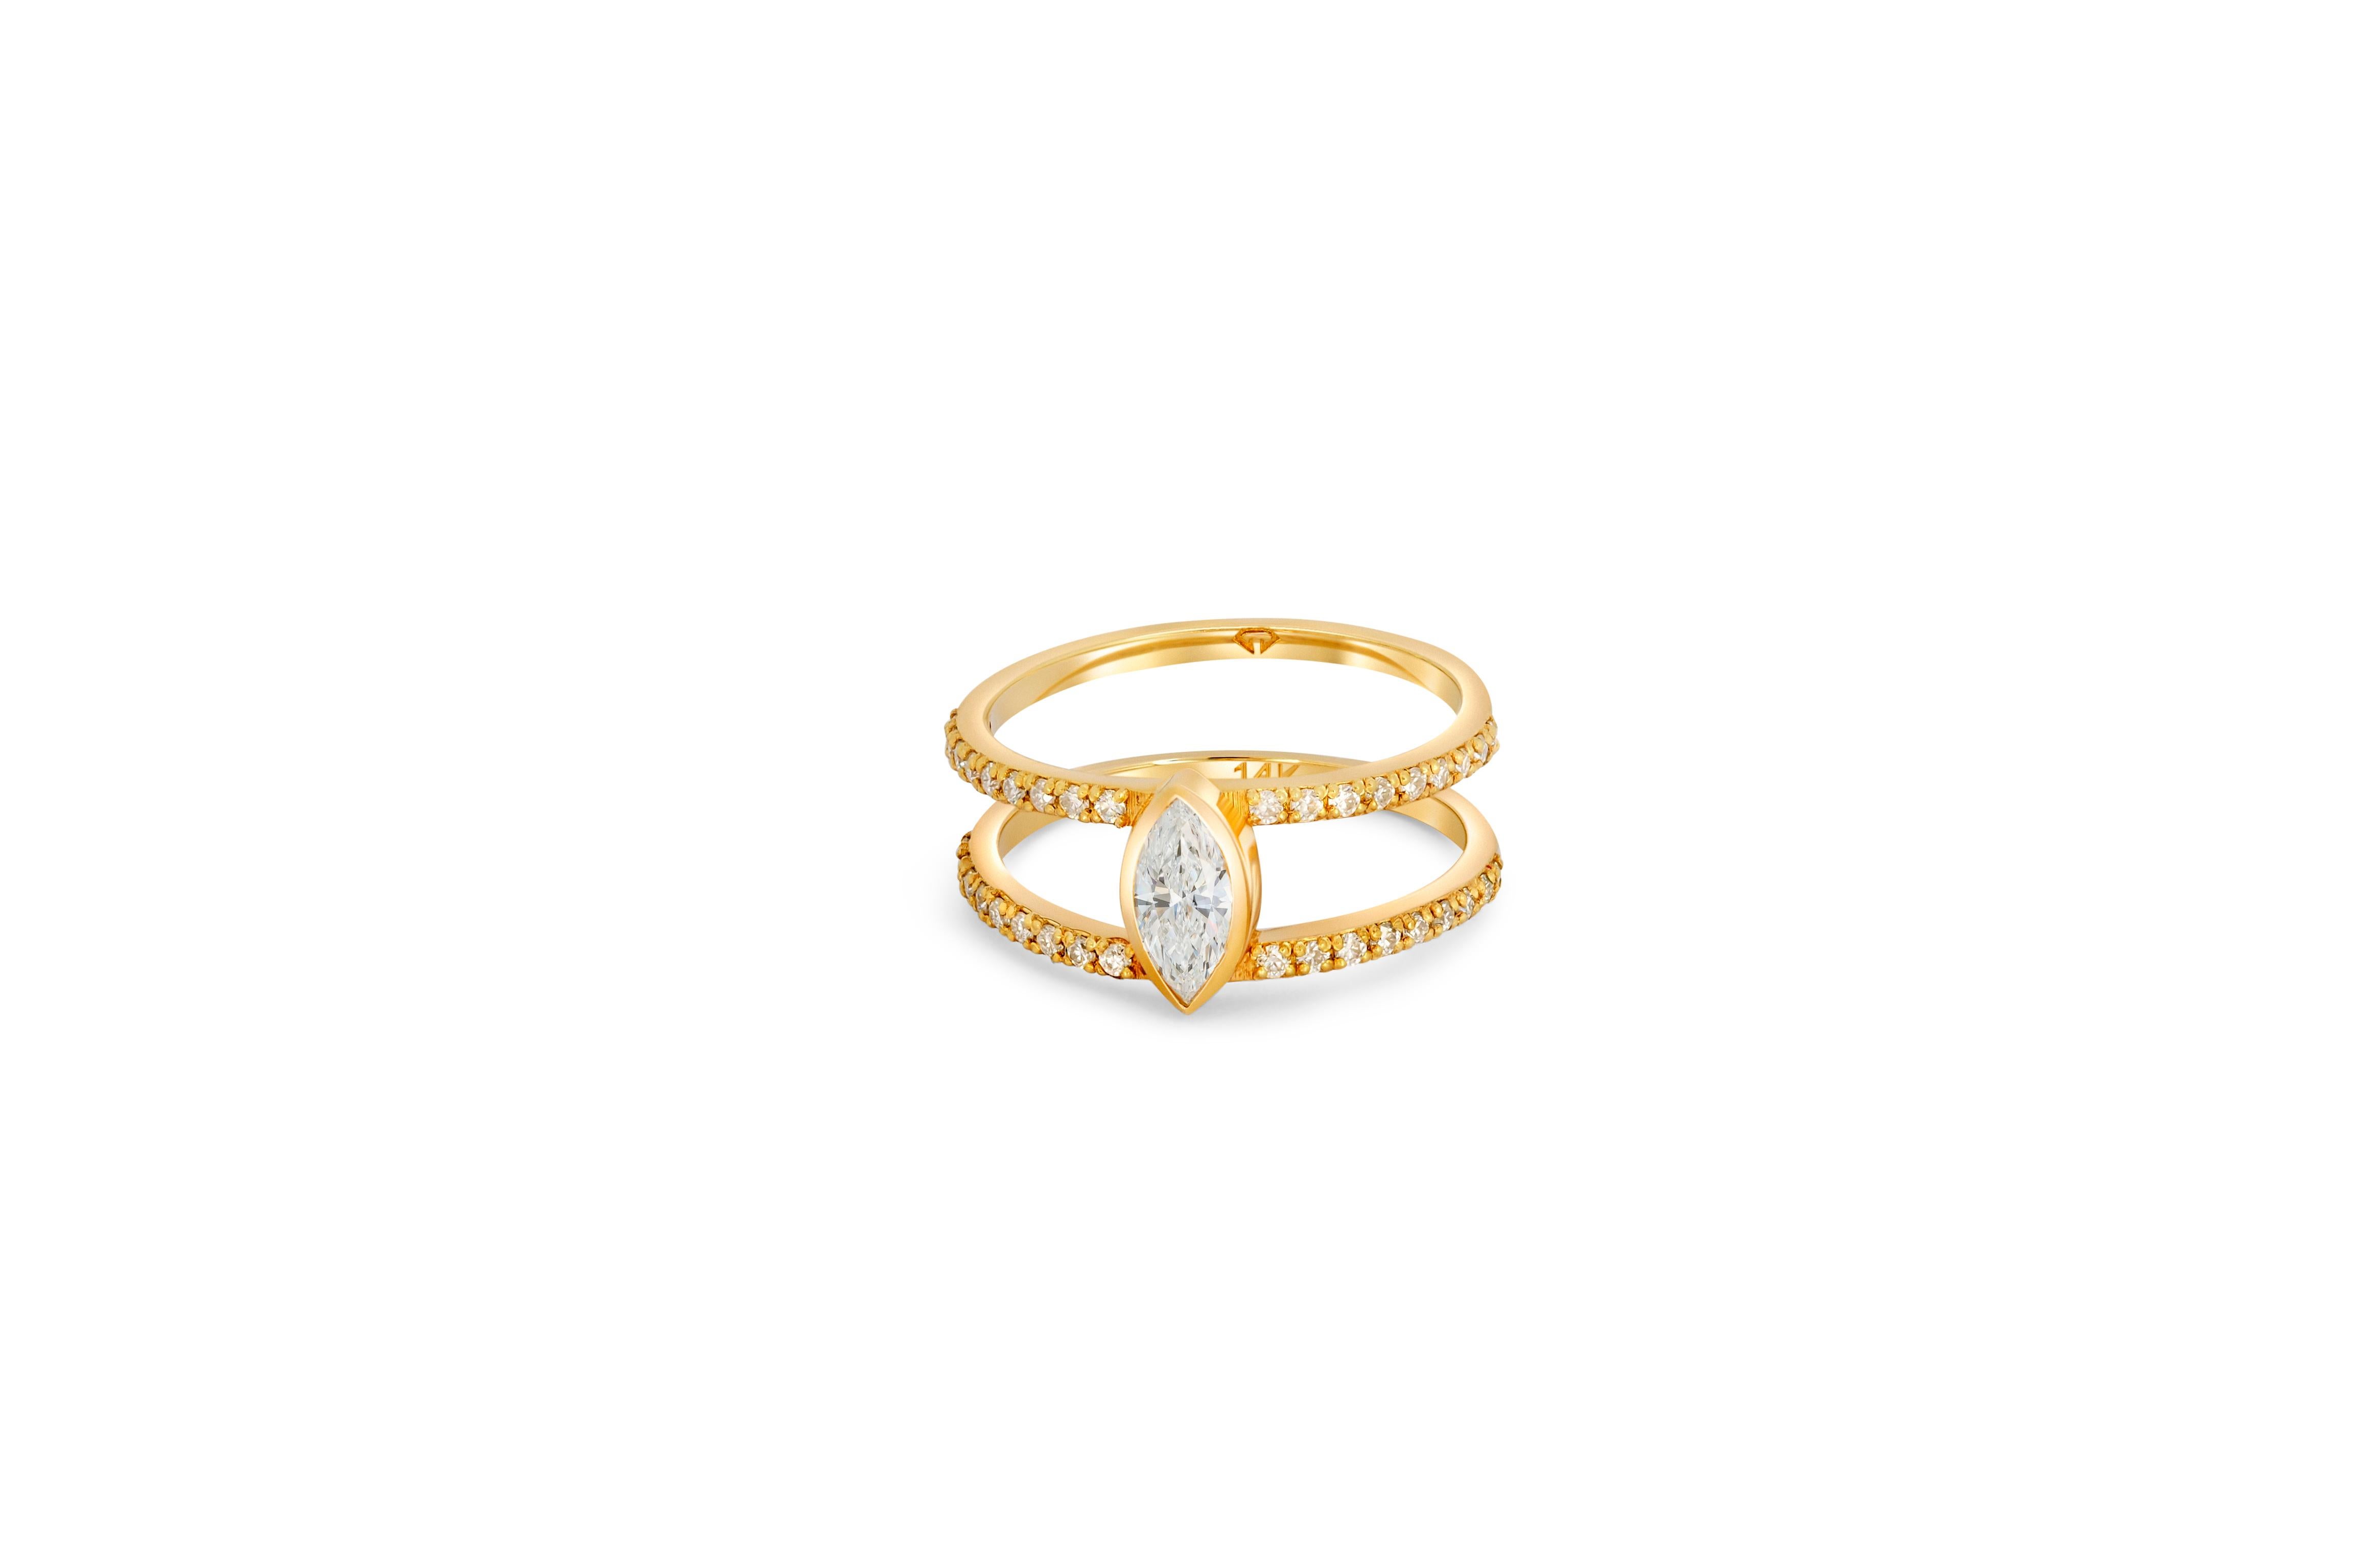 For Sale:  1 ct Marquise moissanite engagement ring in 14k gold.  3